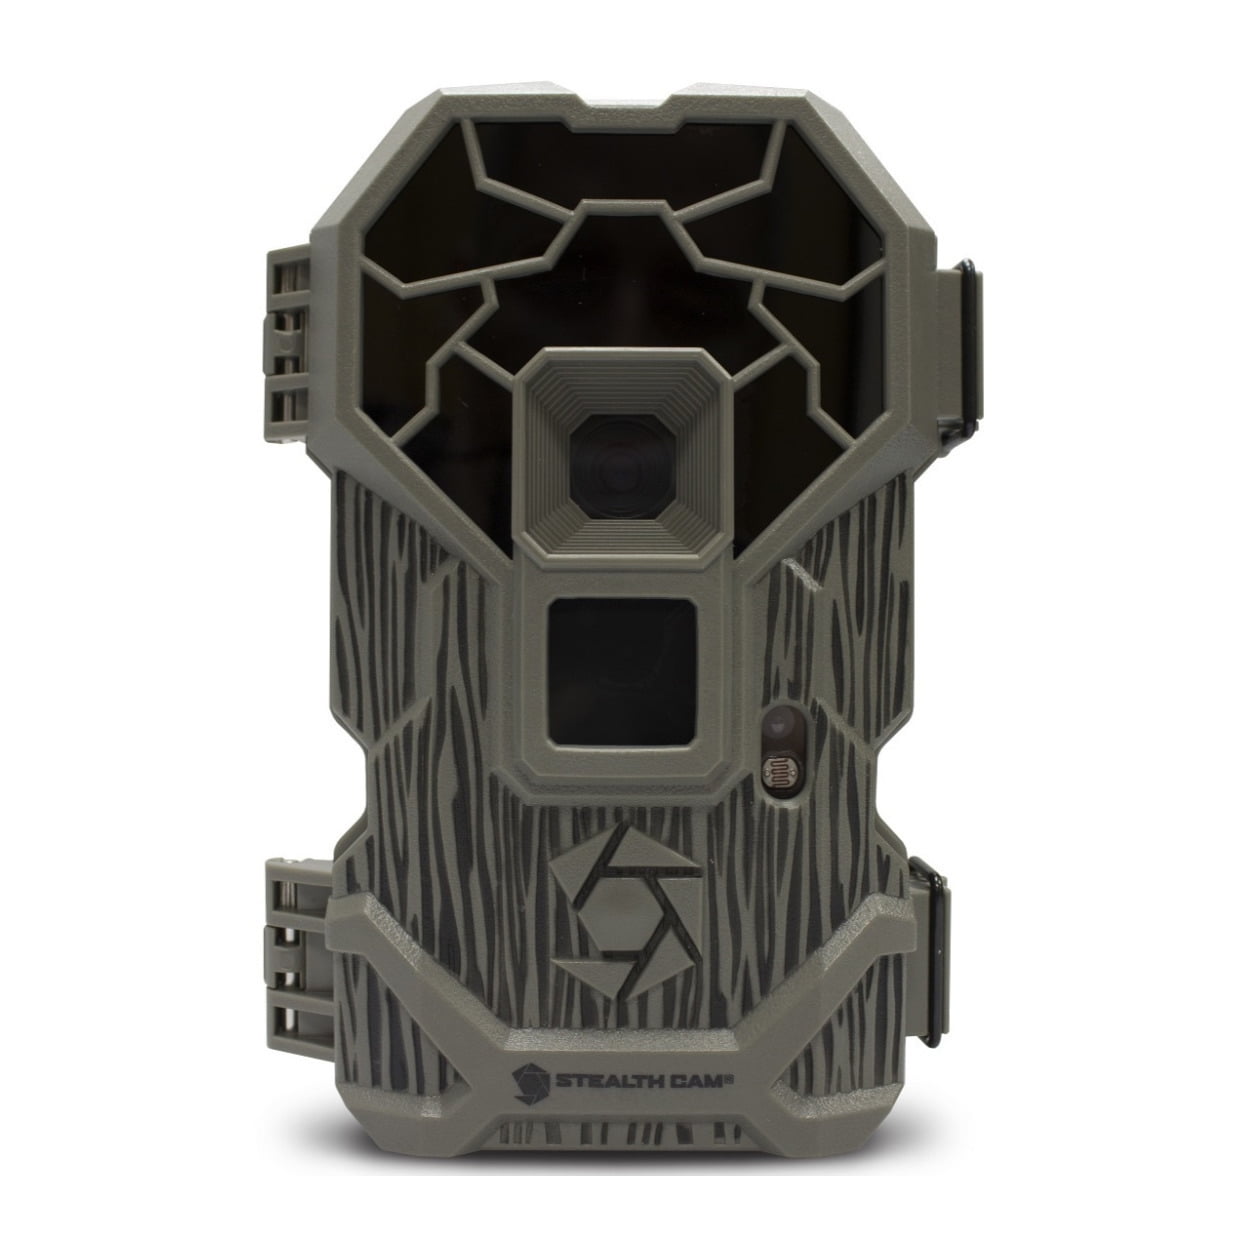 Stealth Cam Pxp18 Pro 18mp Trail Camera for sale online 